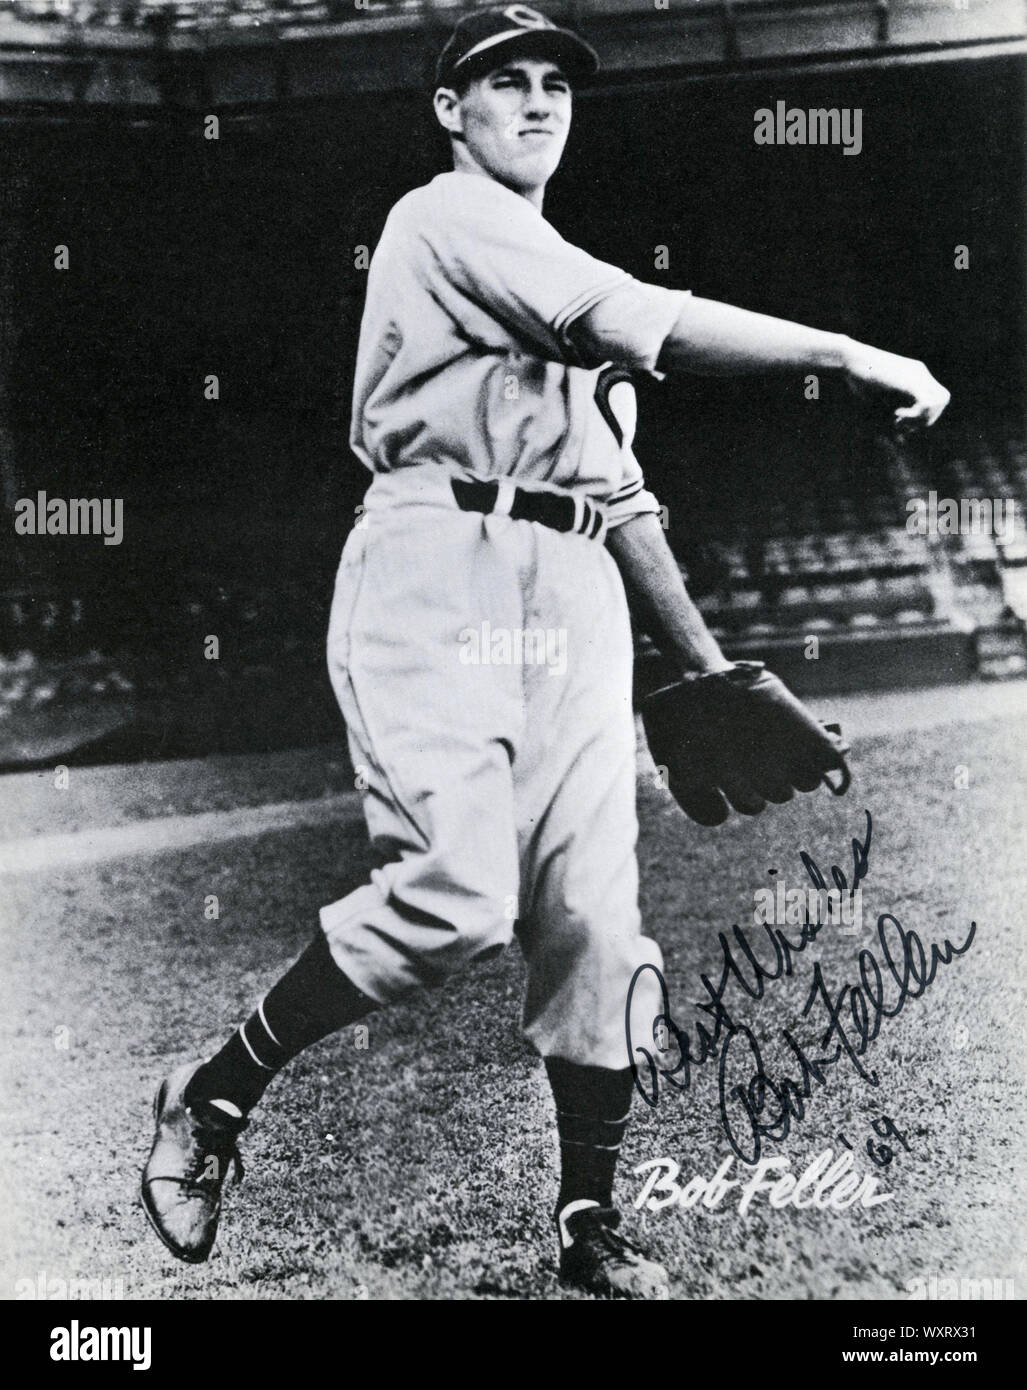 Vintage autographed photo of Hall of Fame pitcher Bob Feller with